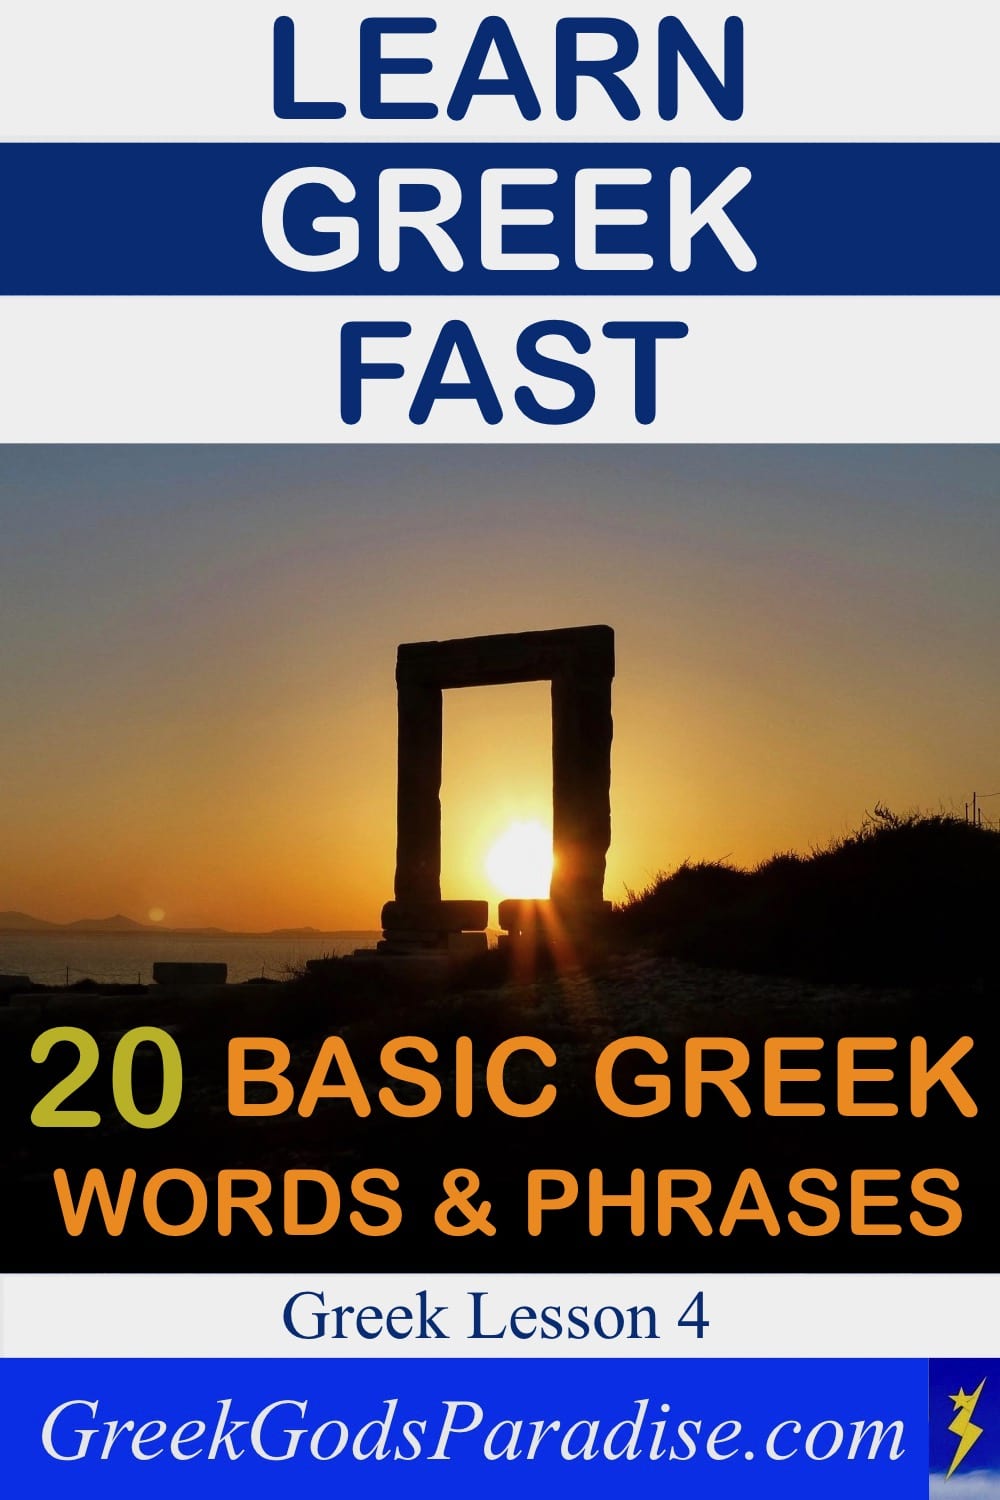 Learn 20 Basic Greek Words and Phrases